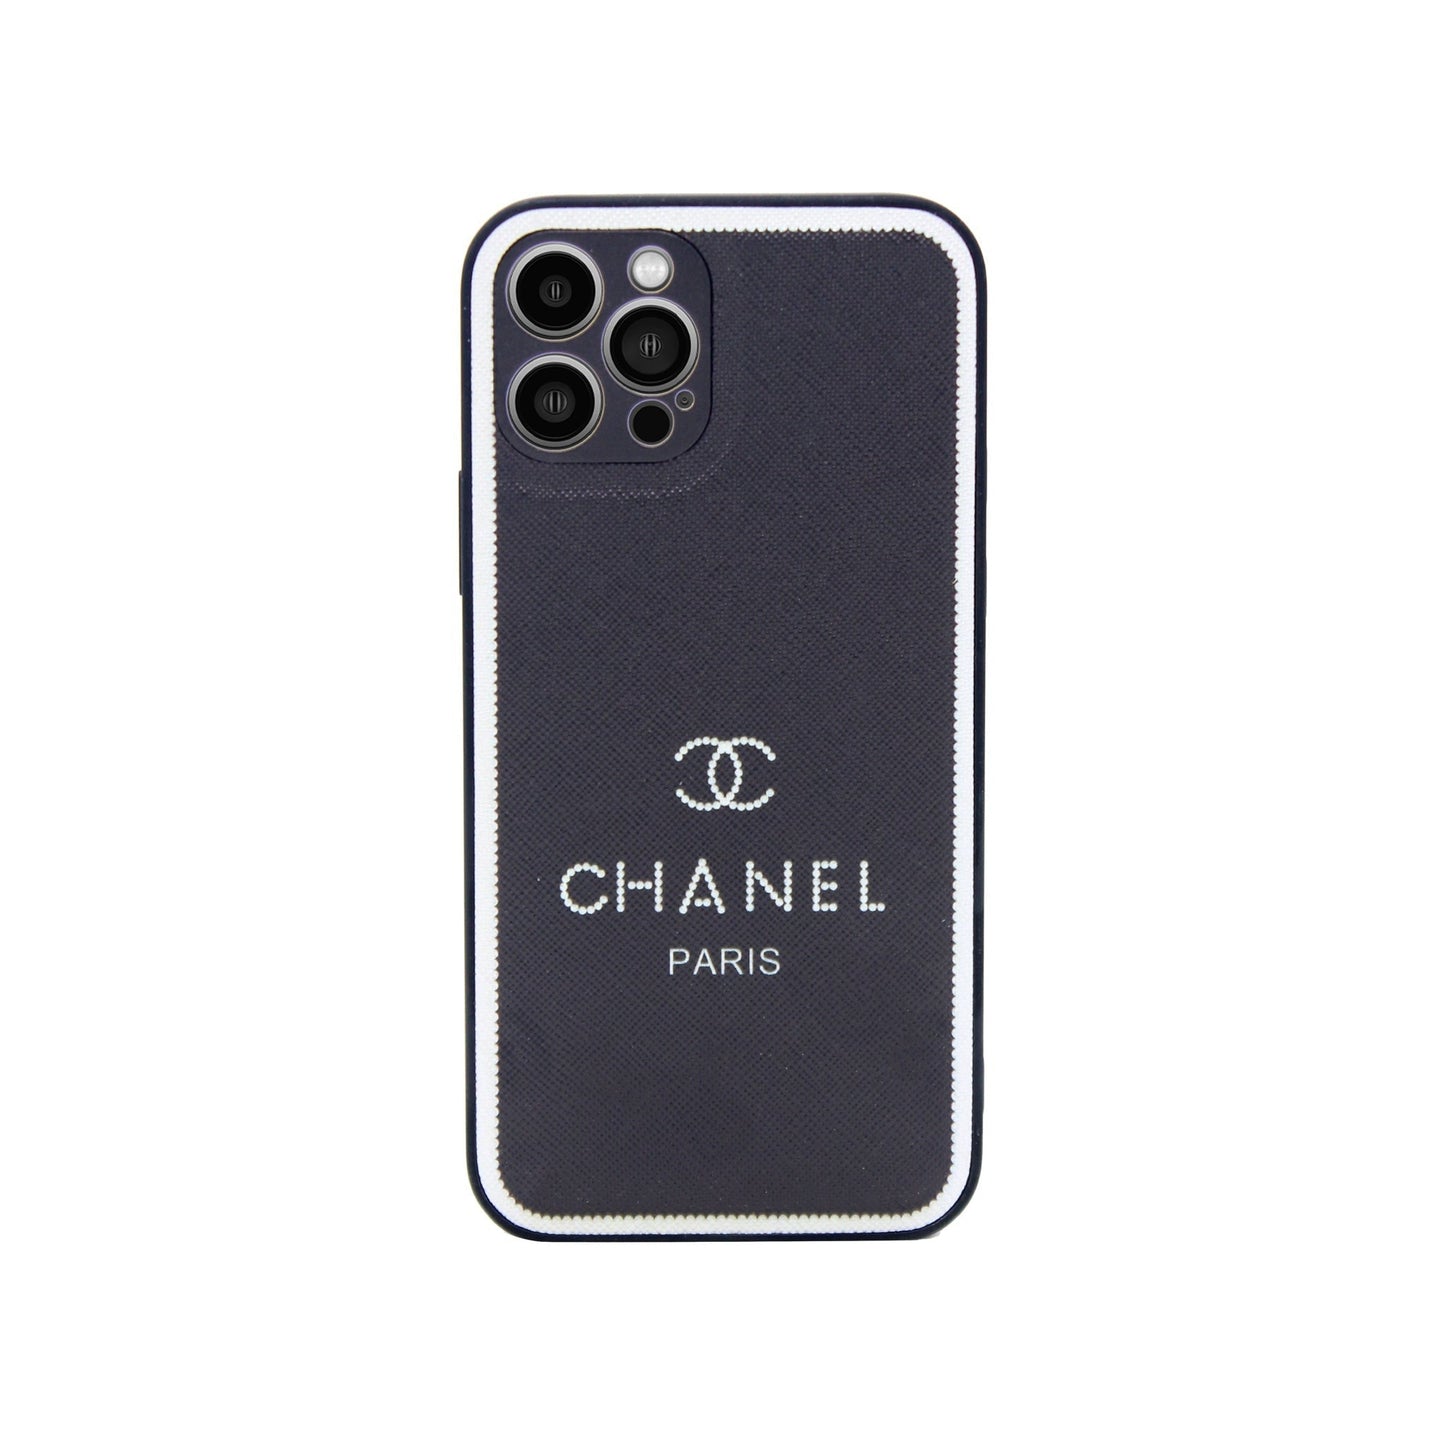 Iphone Channel Case